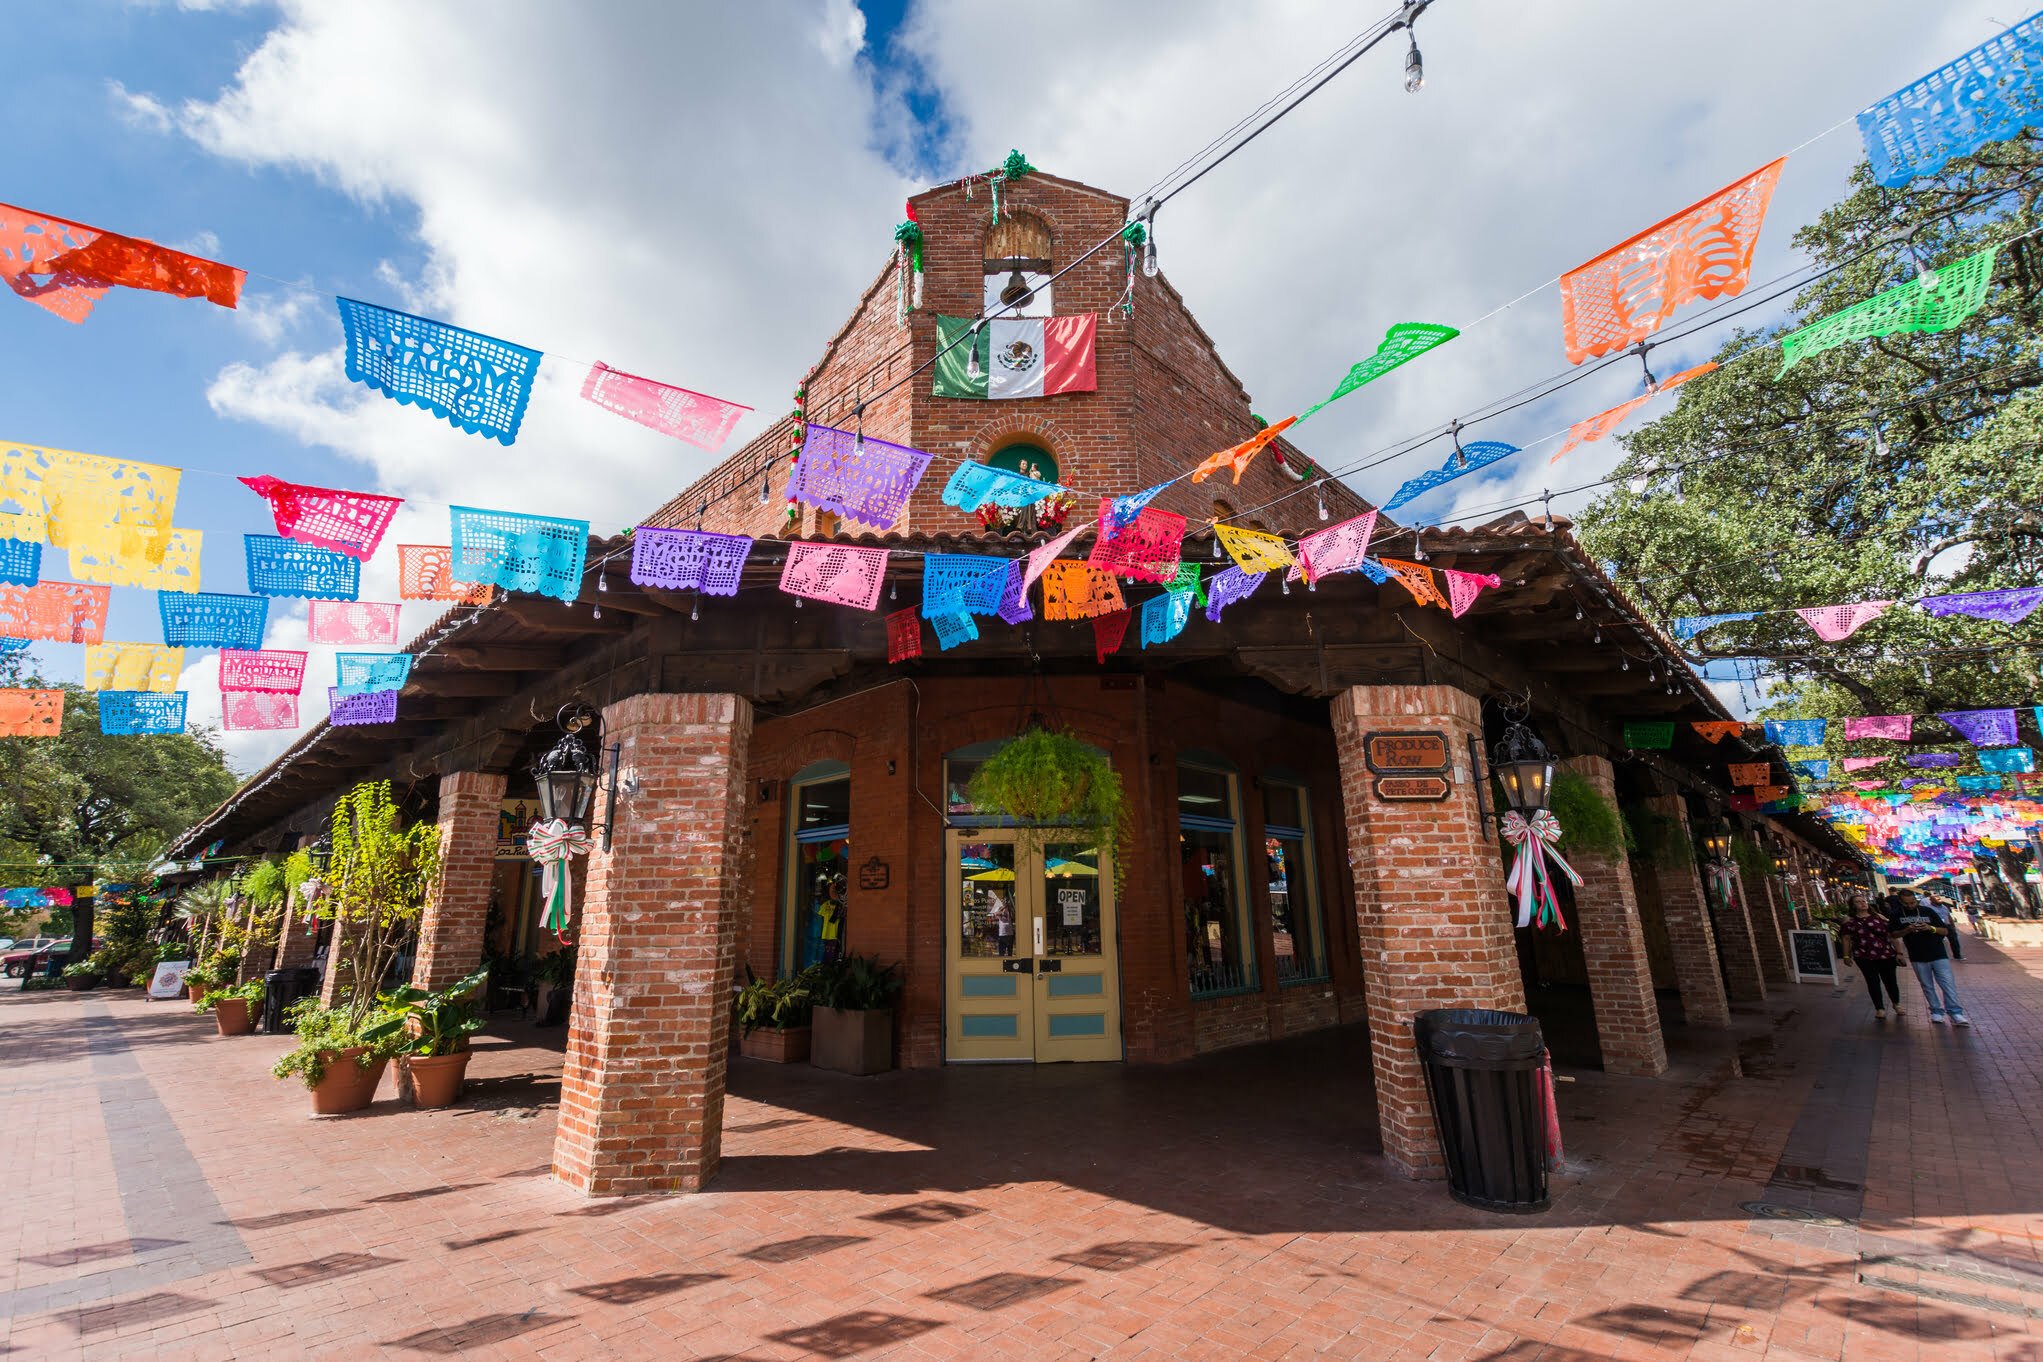 20 Best Things to Do in San Antonio for Tourists and Locals Alike